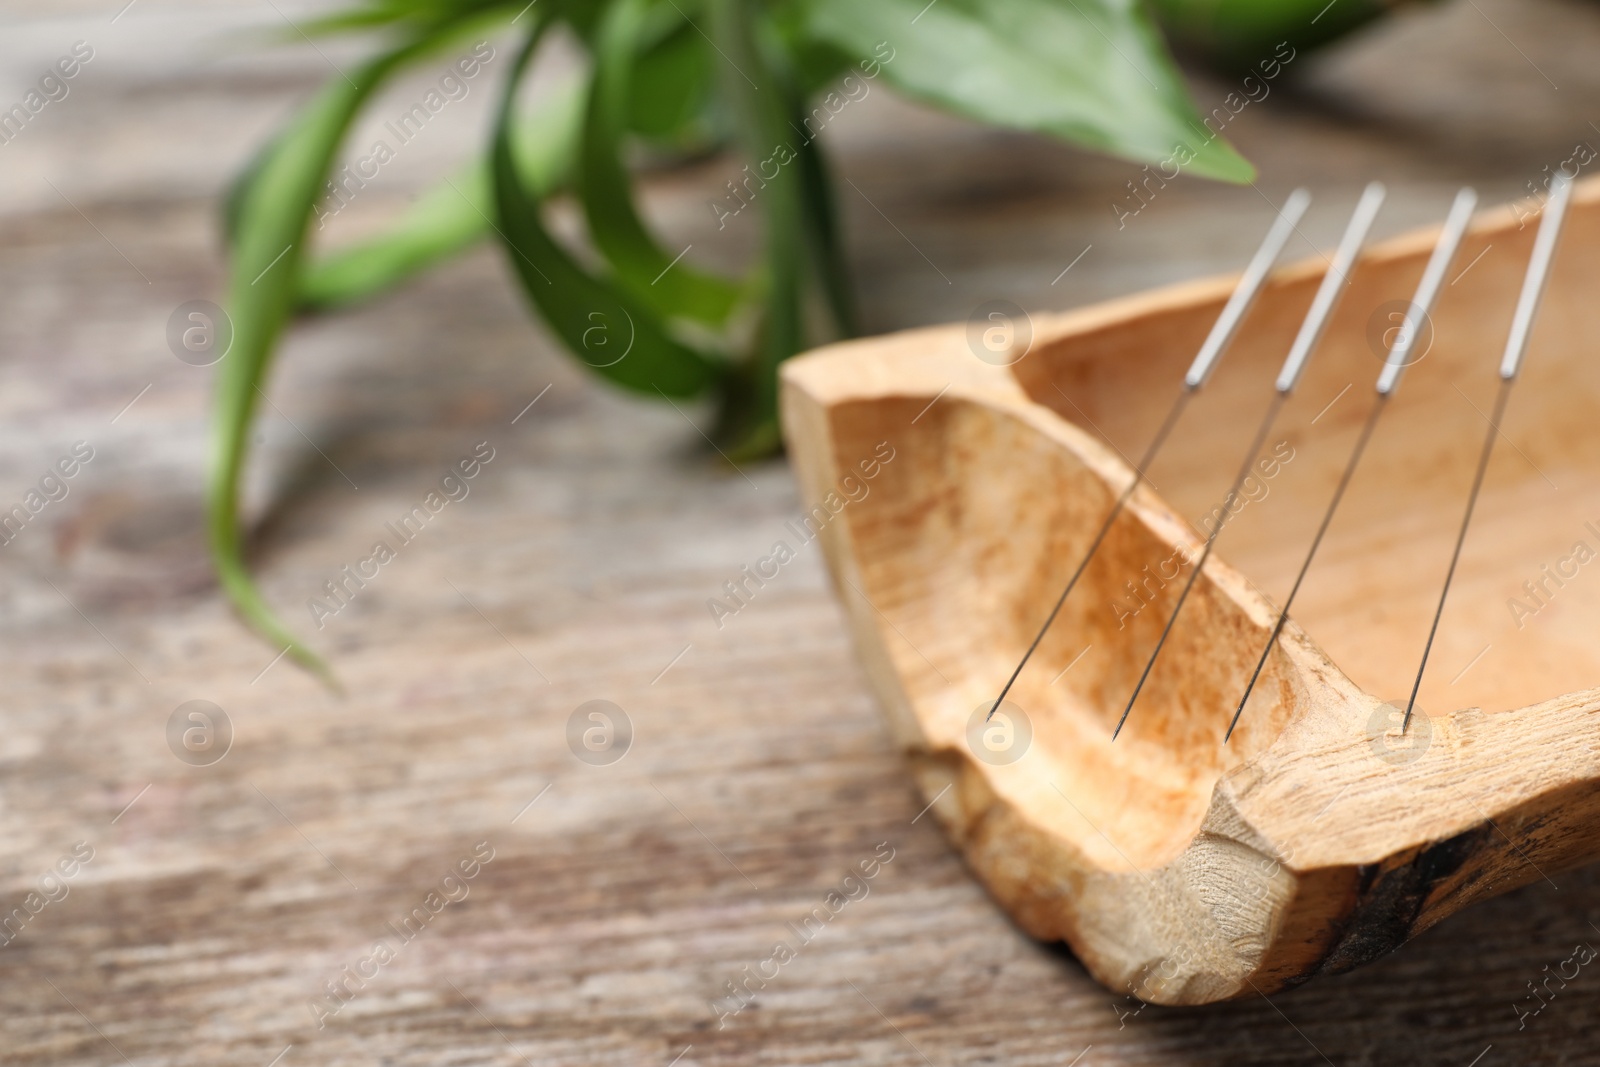 Photo of Bamboo stick with needles for acupuncture on wooden table